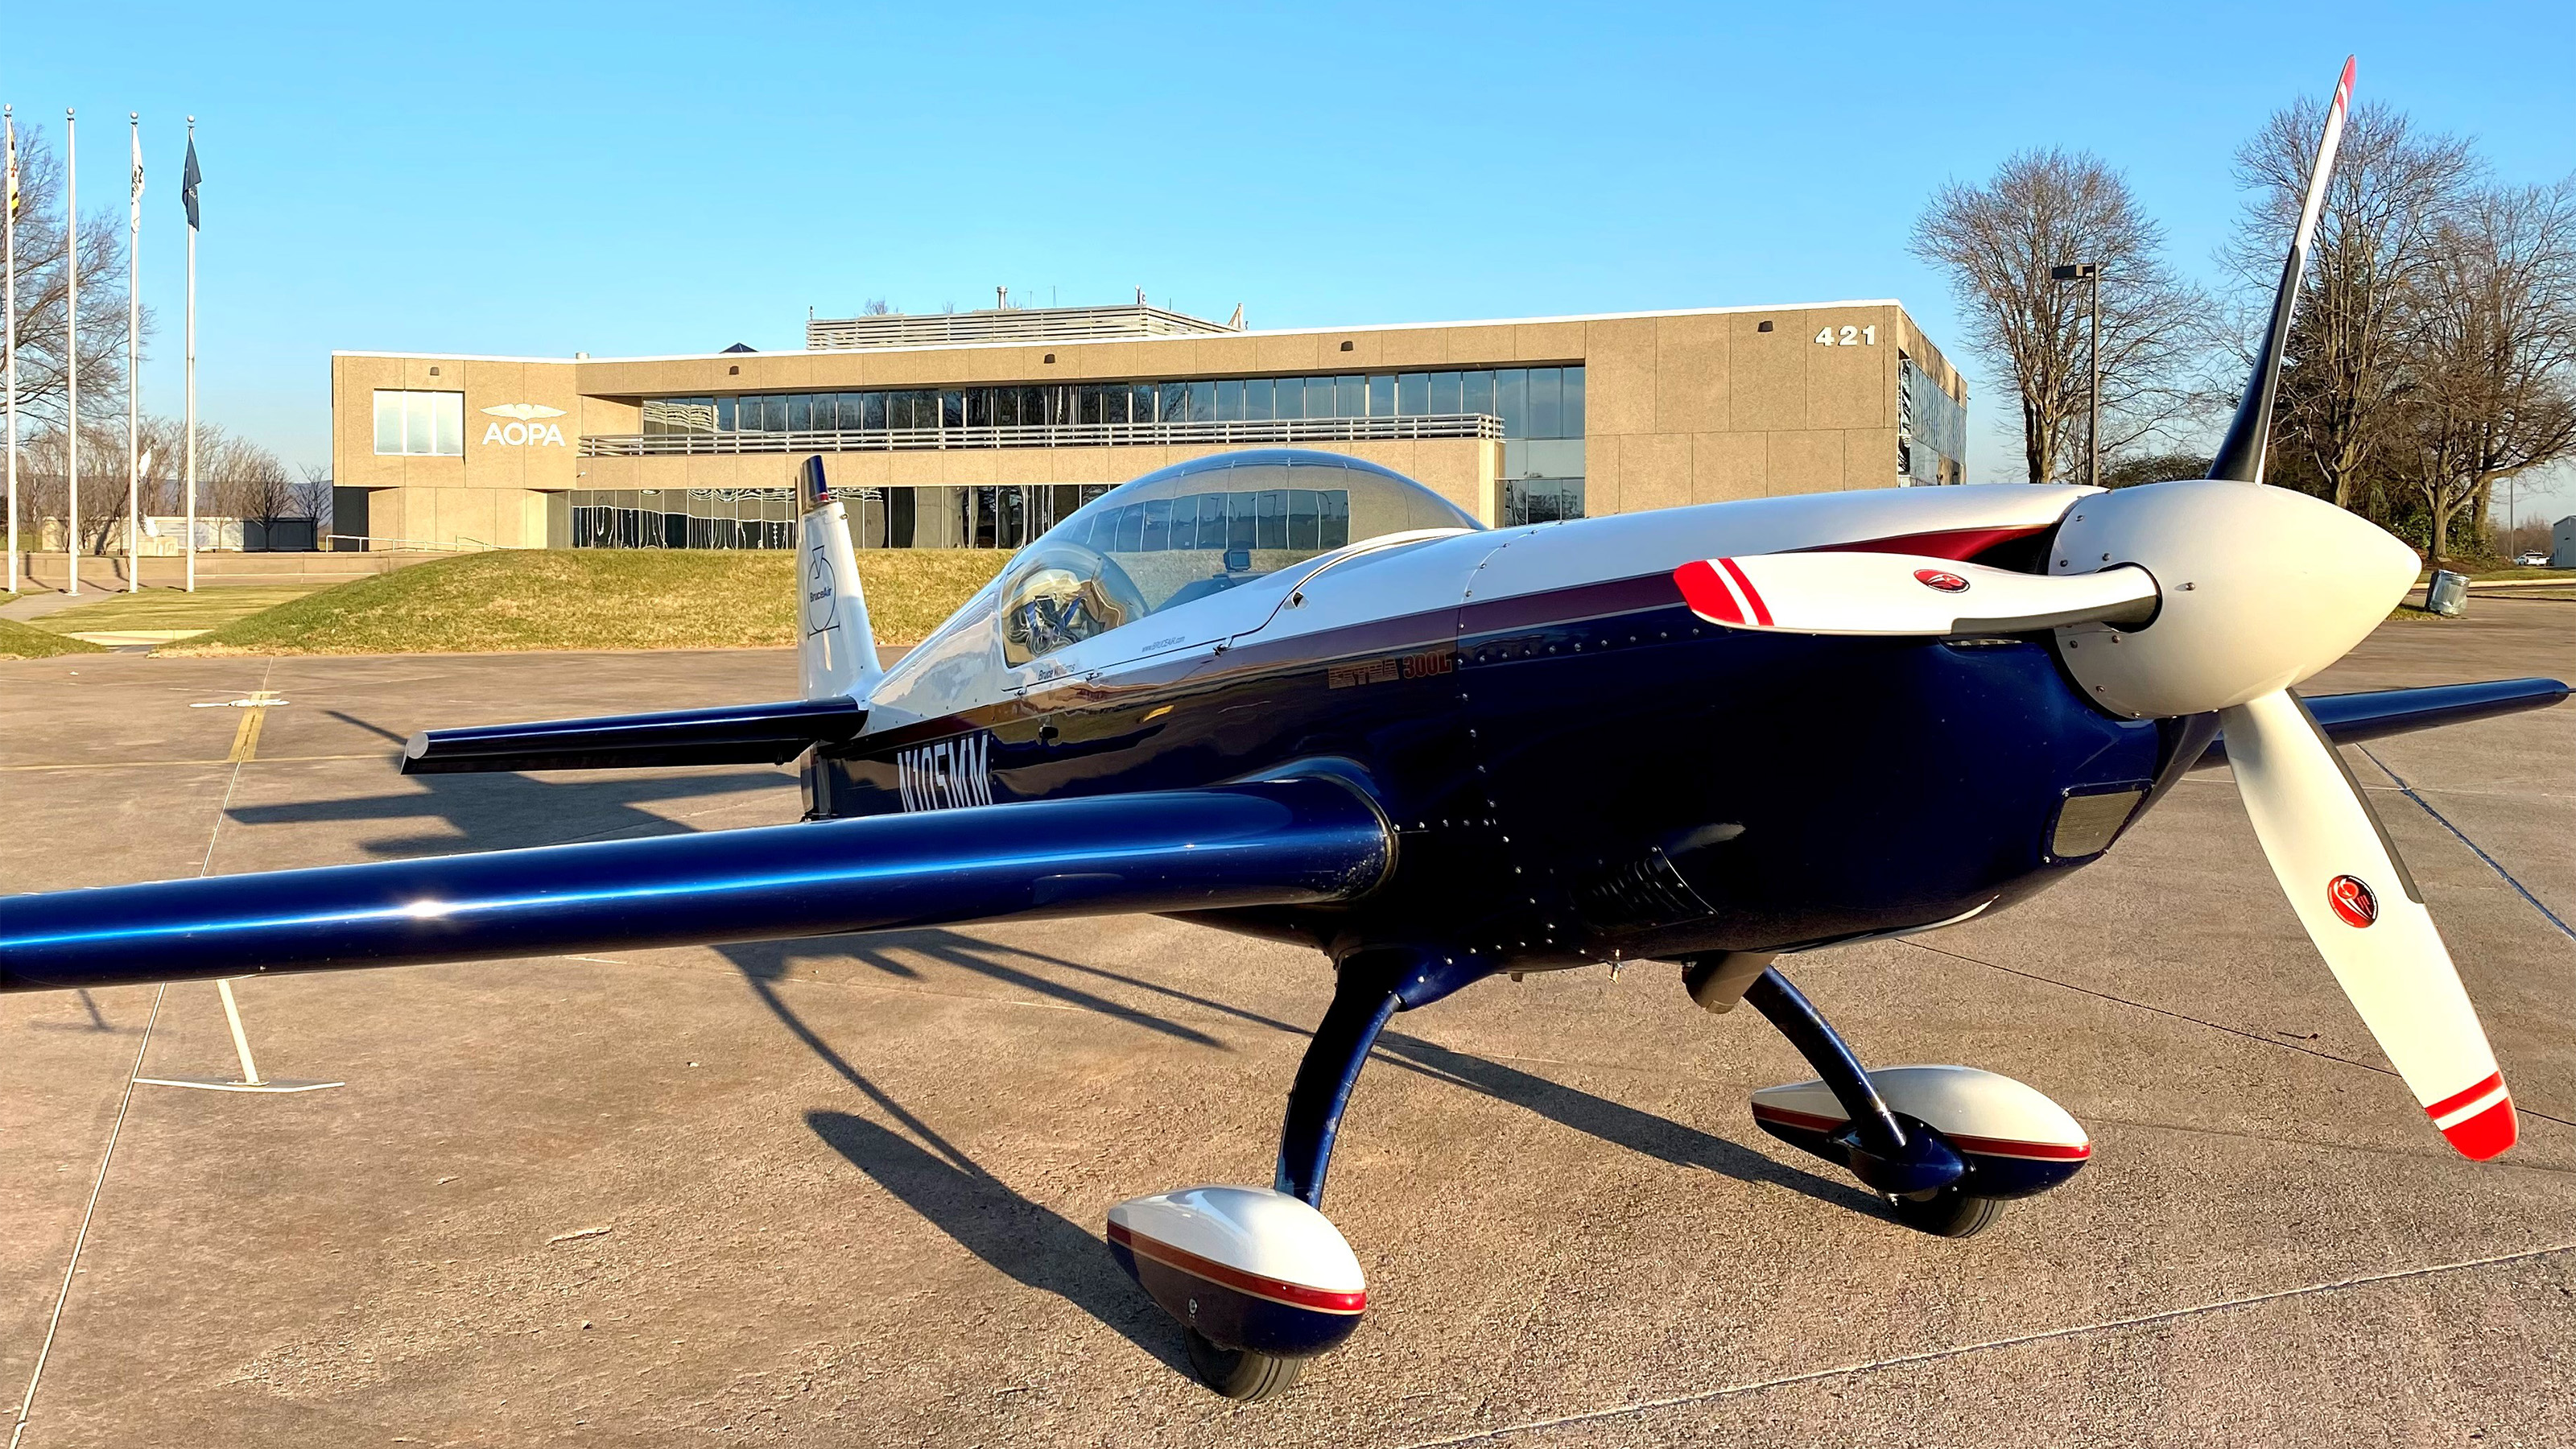 The donated Extra 300L is an exciting new tool for AOPA’s mission to help improve aviation safety and bring more people into aviation. Photo by Dave Hirschman.